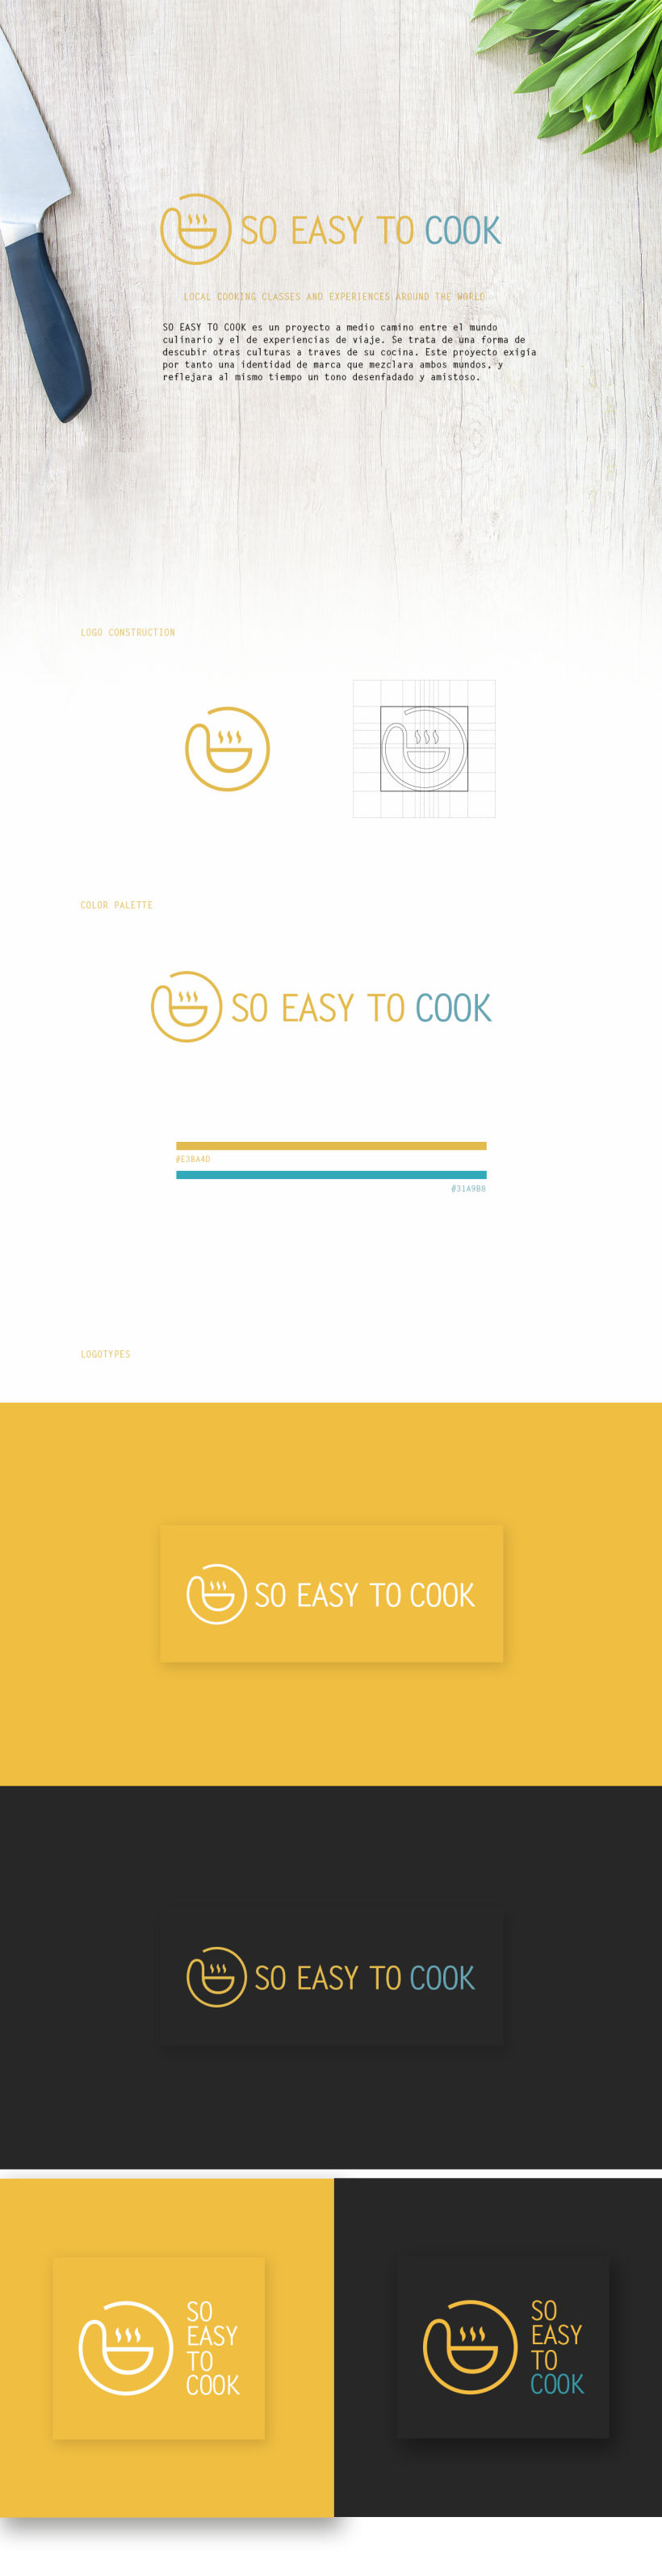 So Easy To Cook - Branding -1